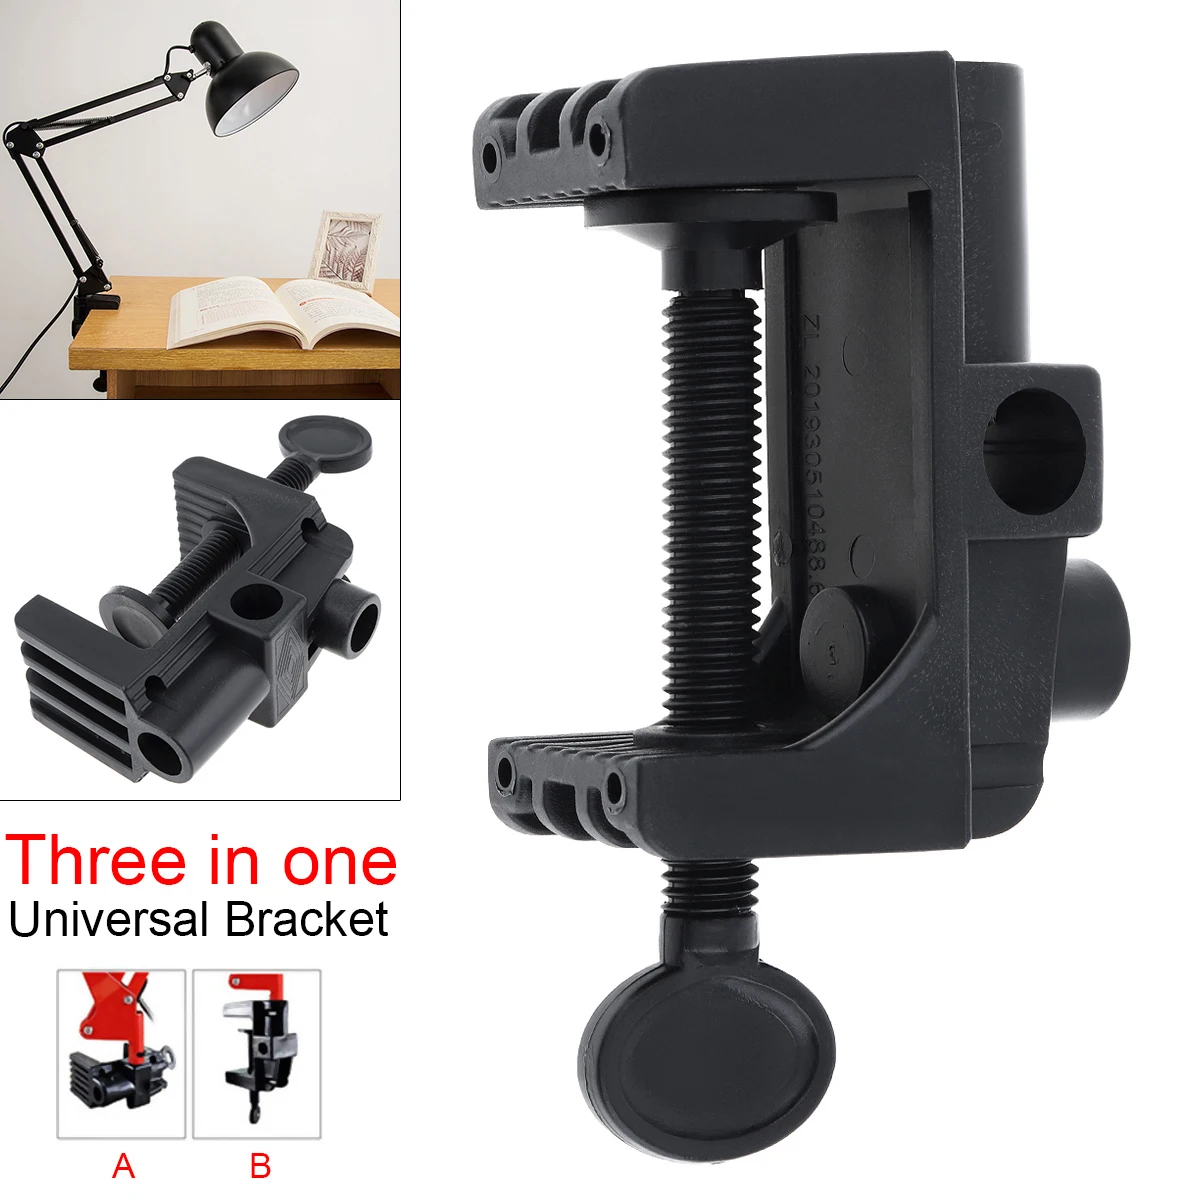 Desk Lamp Mount Holder C-Shape Made of Plastic DIY Fixed Clip for Table Light / Microphone / Camera 3mp 5mp 25mm cctv cs lens view 70m 11 degrees 1 2 1 2 5 f1 4 ir fixed iris cs mount for security ccd ahd ip camera